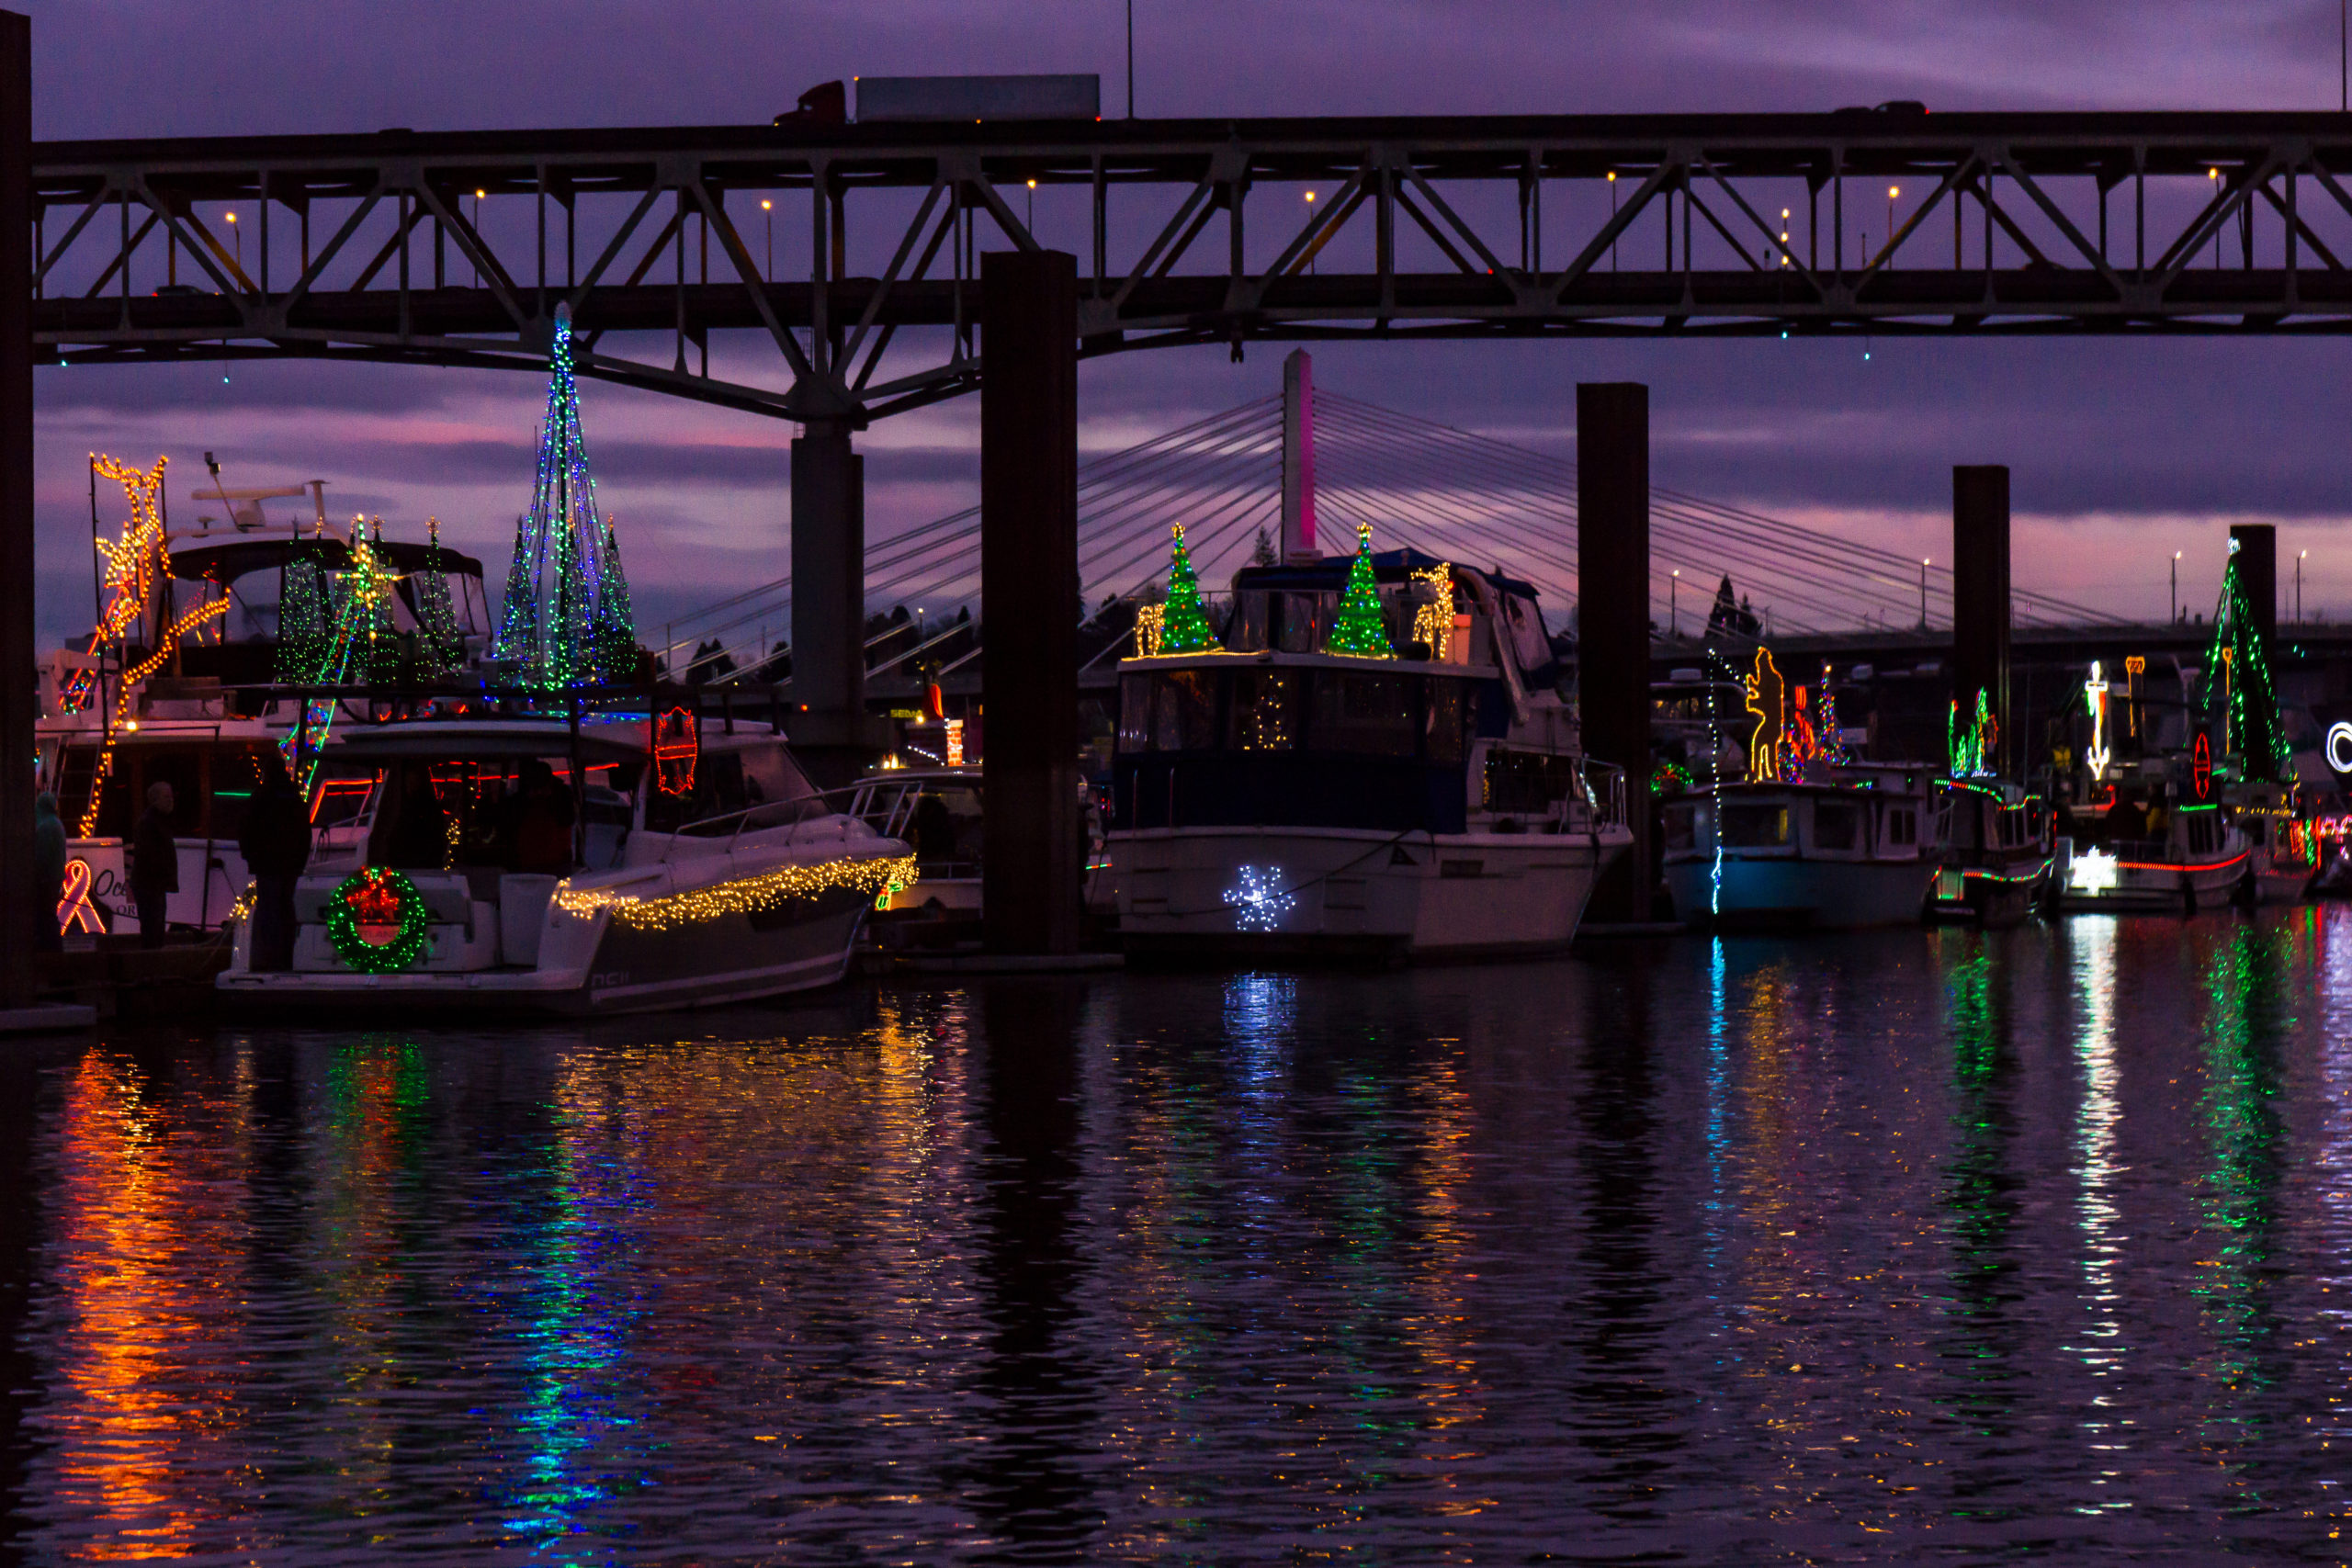 ‘Let’s Go Brandon’ Boat Wins Christmas Lights Contest; Gets Disqualified